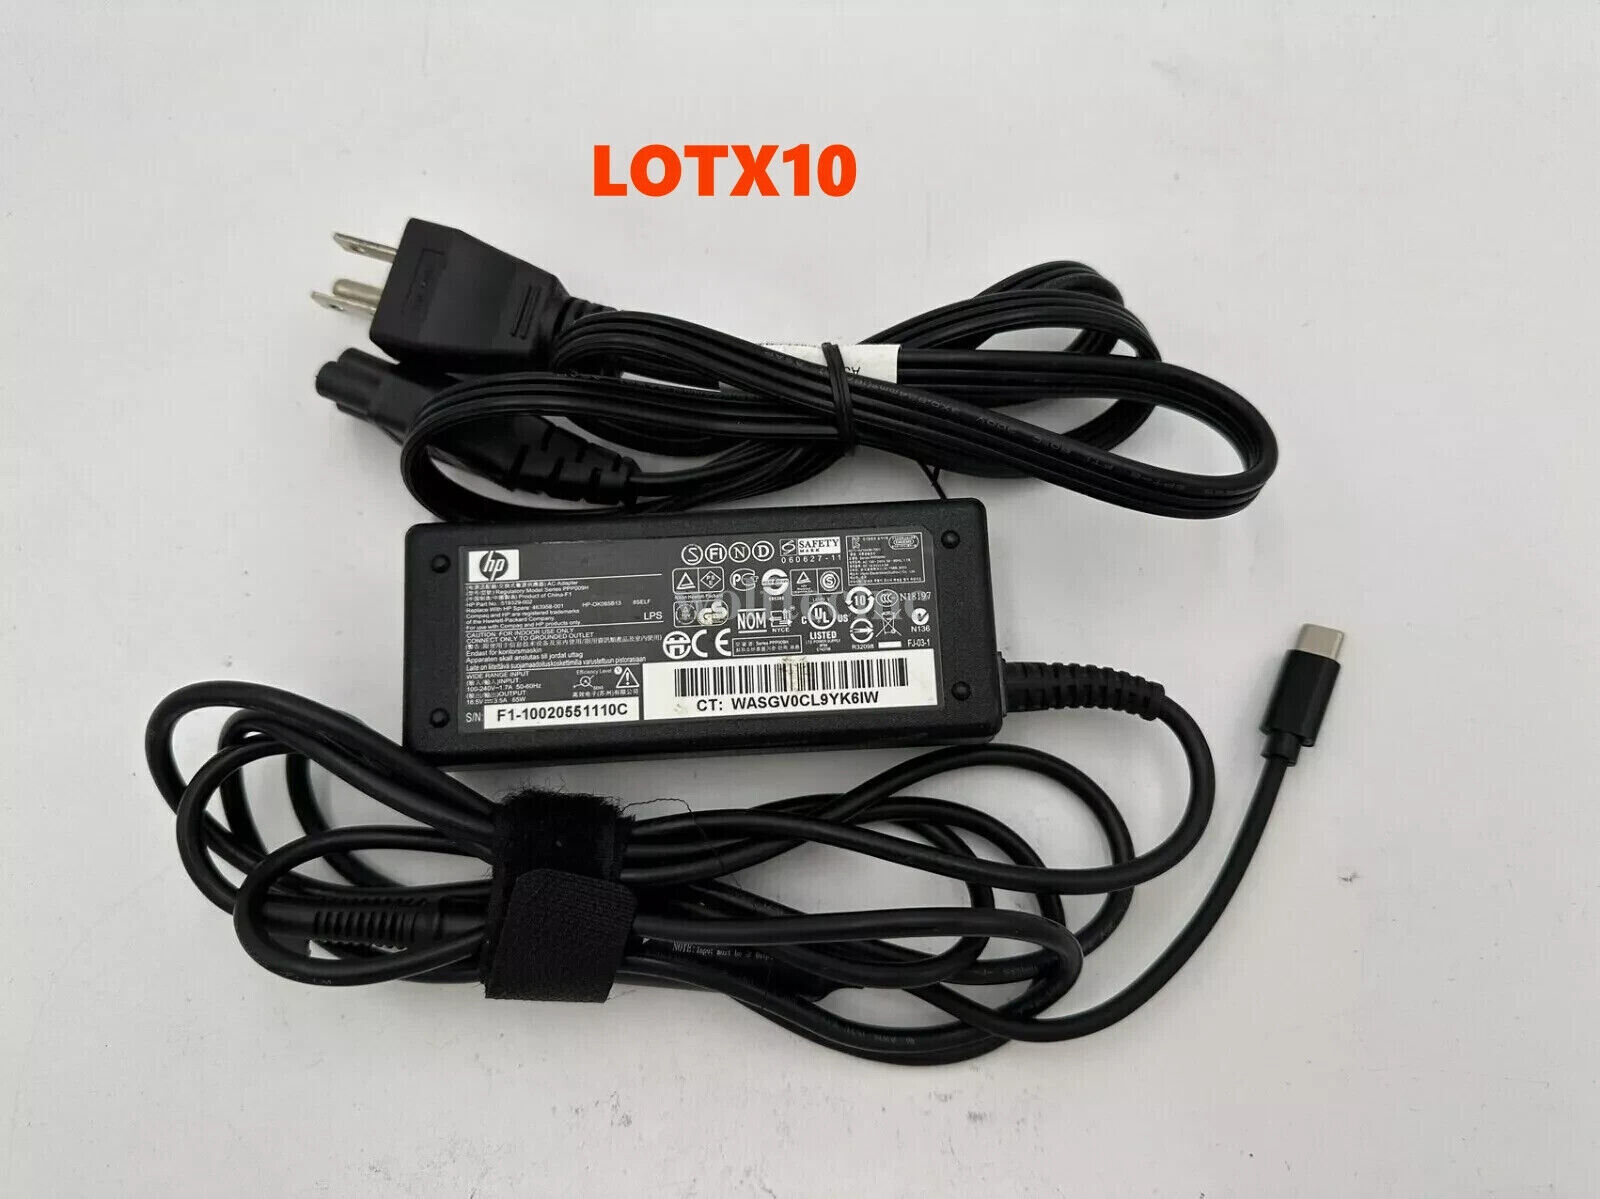 LOT 10 OEM 65W Type-C USB-C Laptop Charger for HP Chromebook Lenovo Dell Samsung